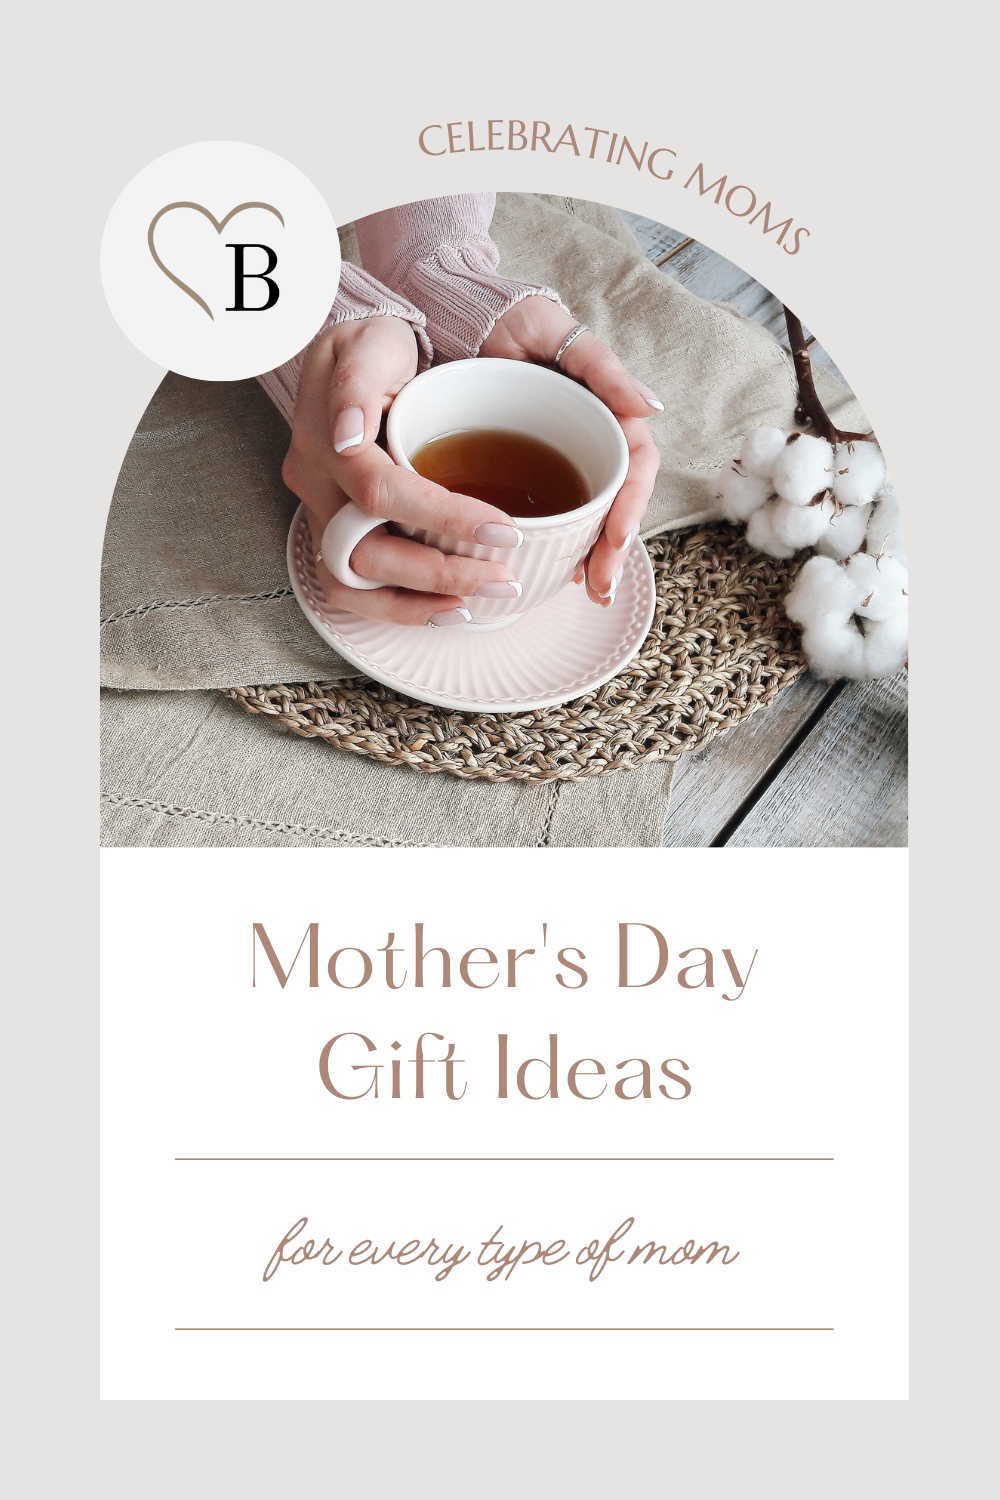 Mother’s Day Gift Ideas!